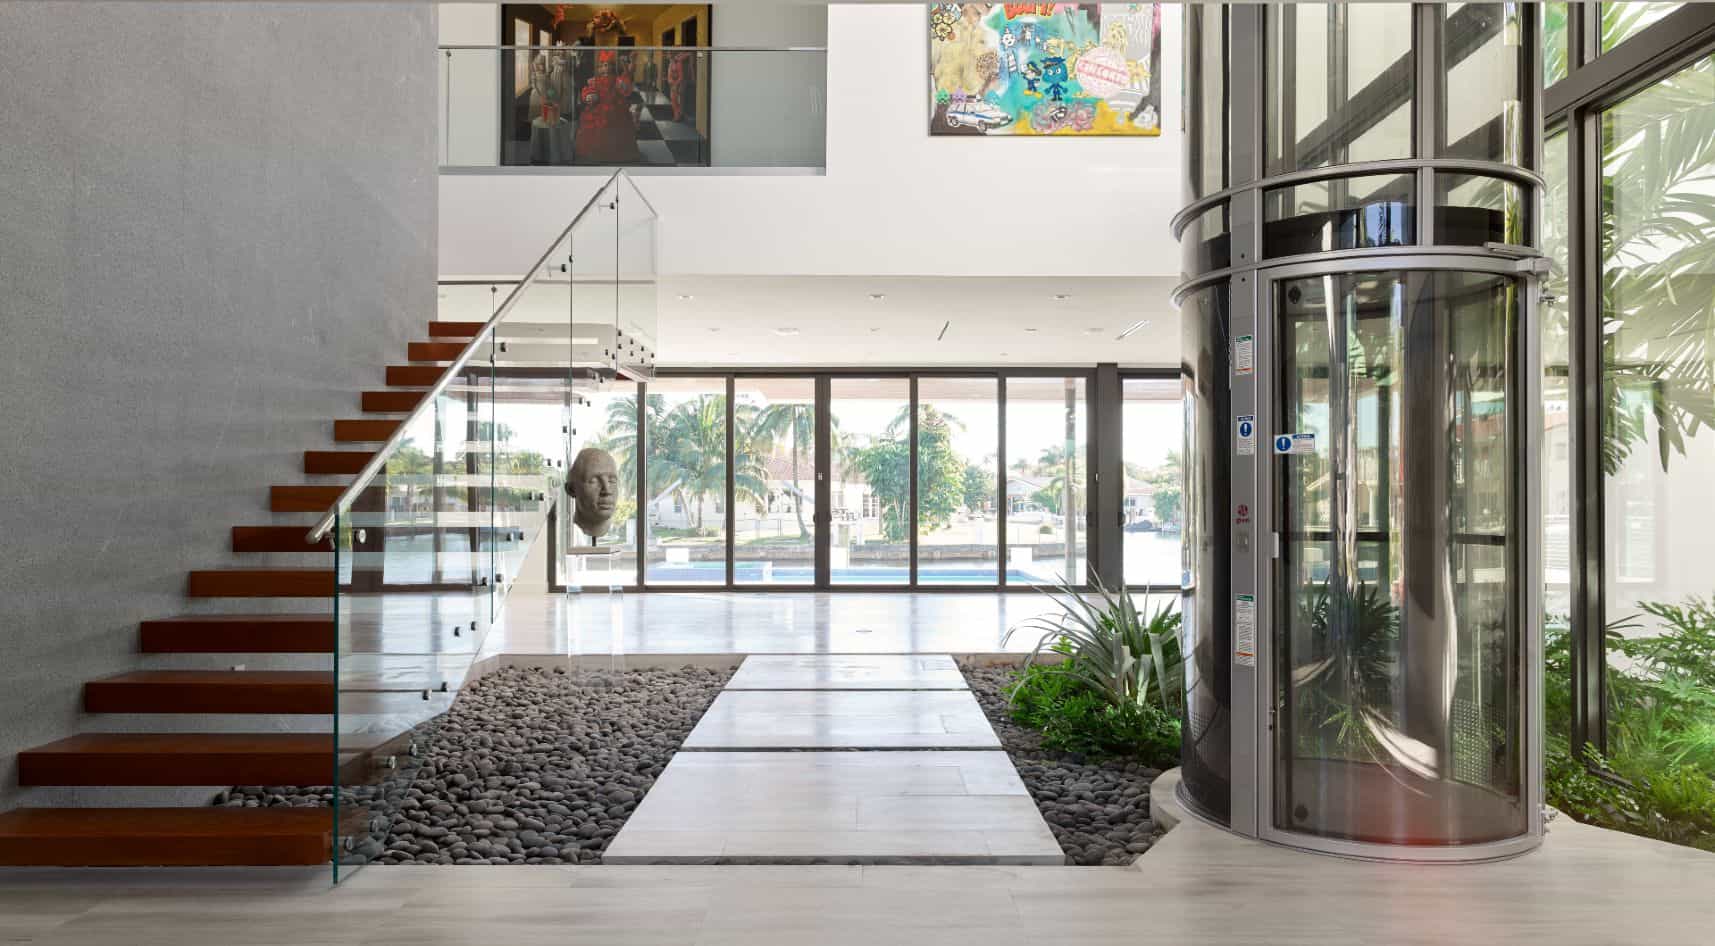 pve52 vacuum elevator in an anodized silver finish in a modern home's atrium entry way